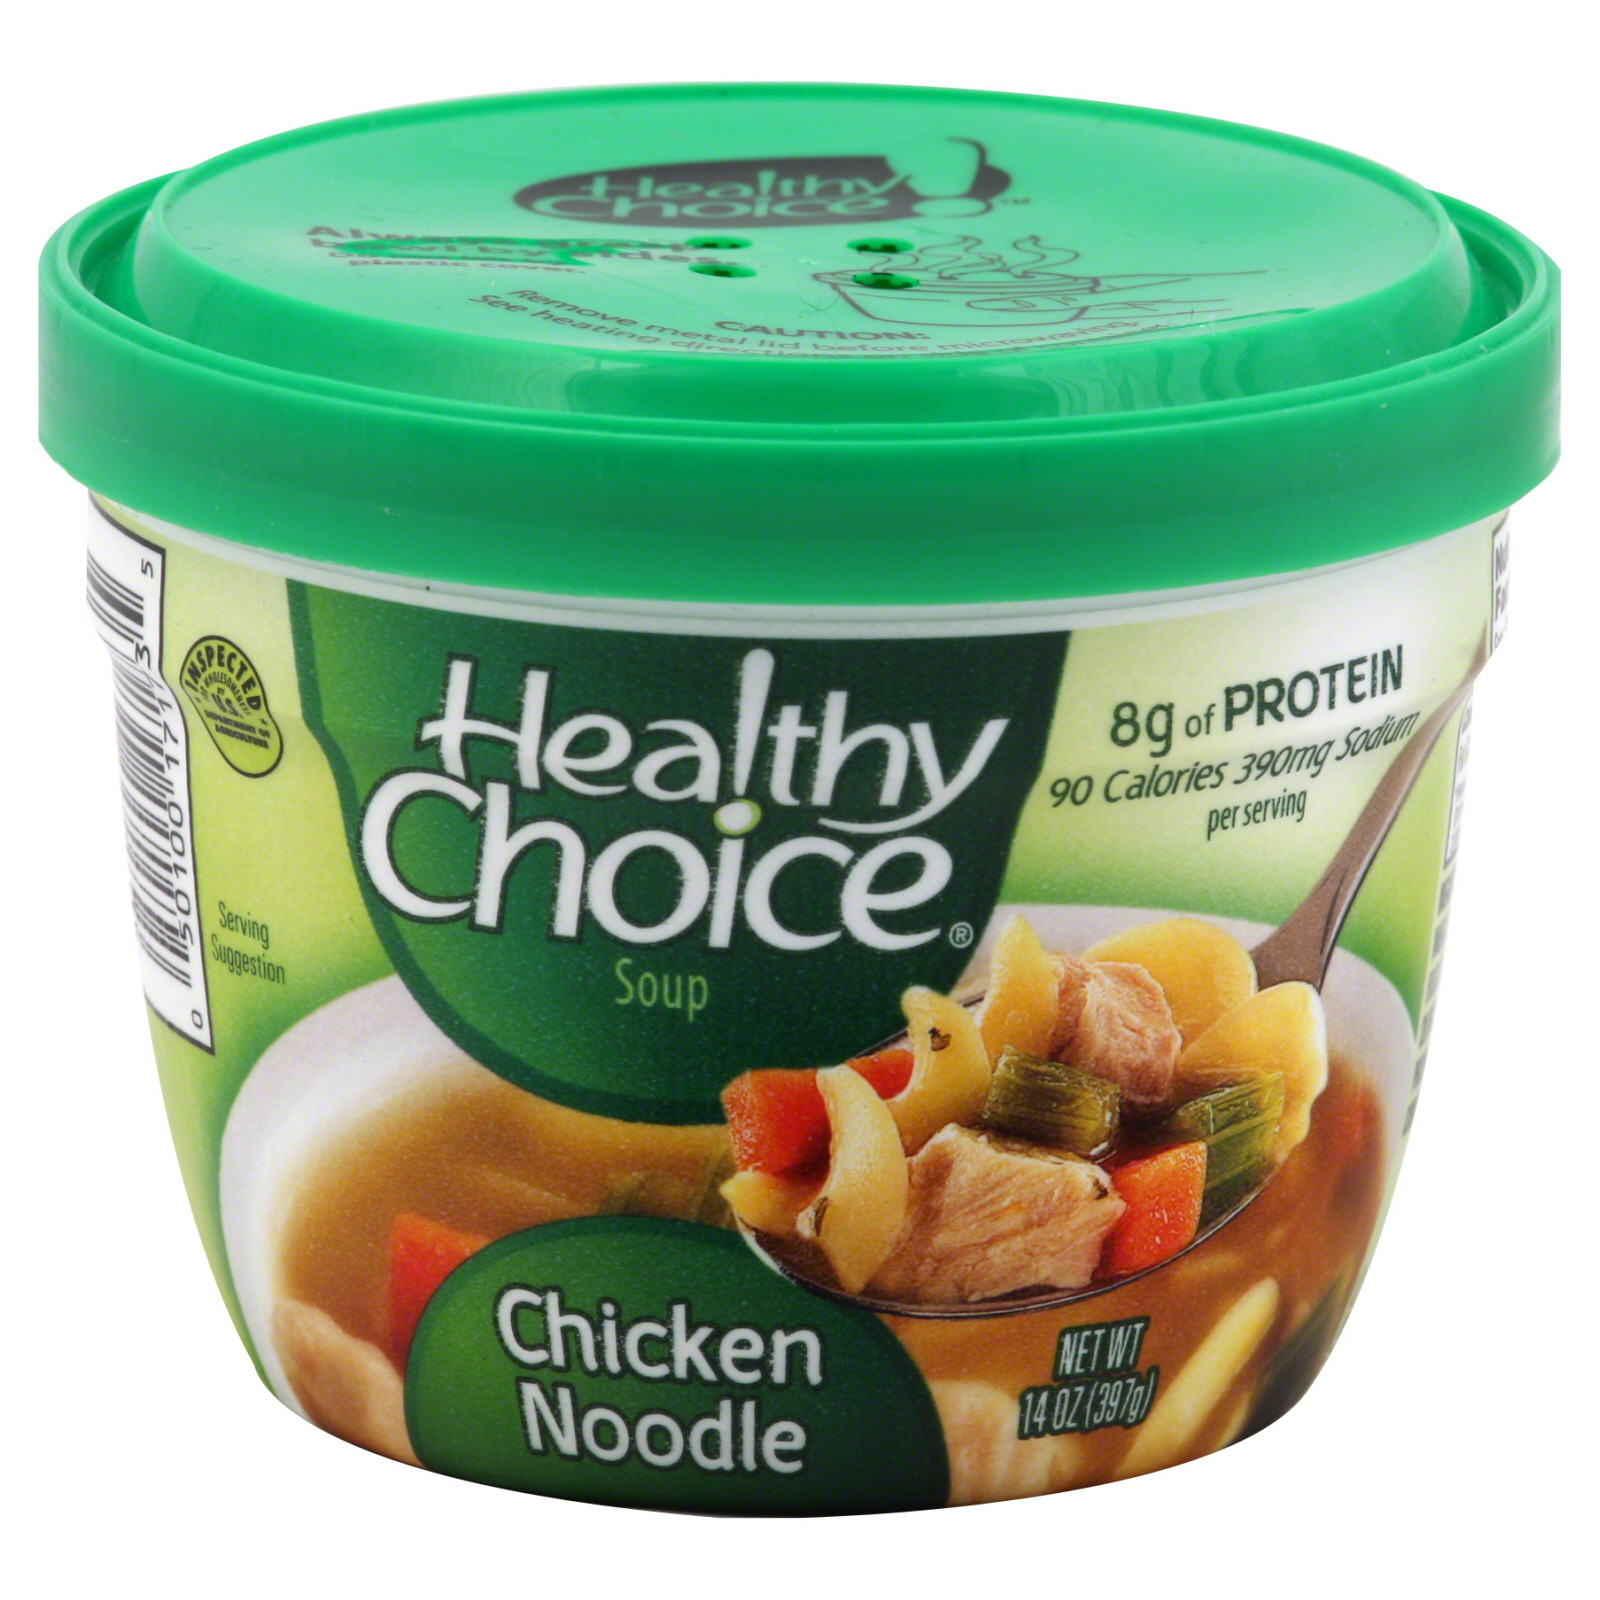 Healthy Choice Chicken Noodle Soup
 Healthy Choice Soup Old Fashioned Chicken Noodle 14 oz